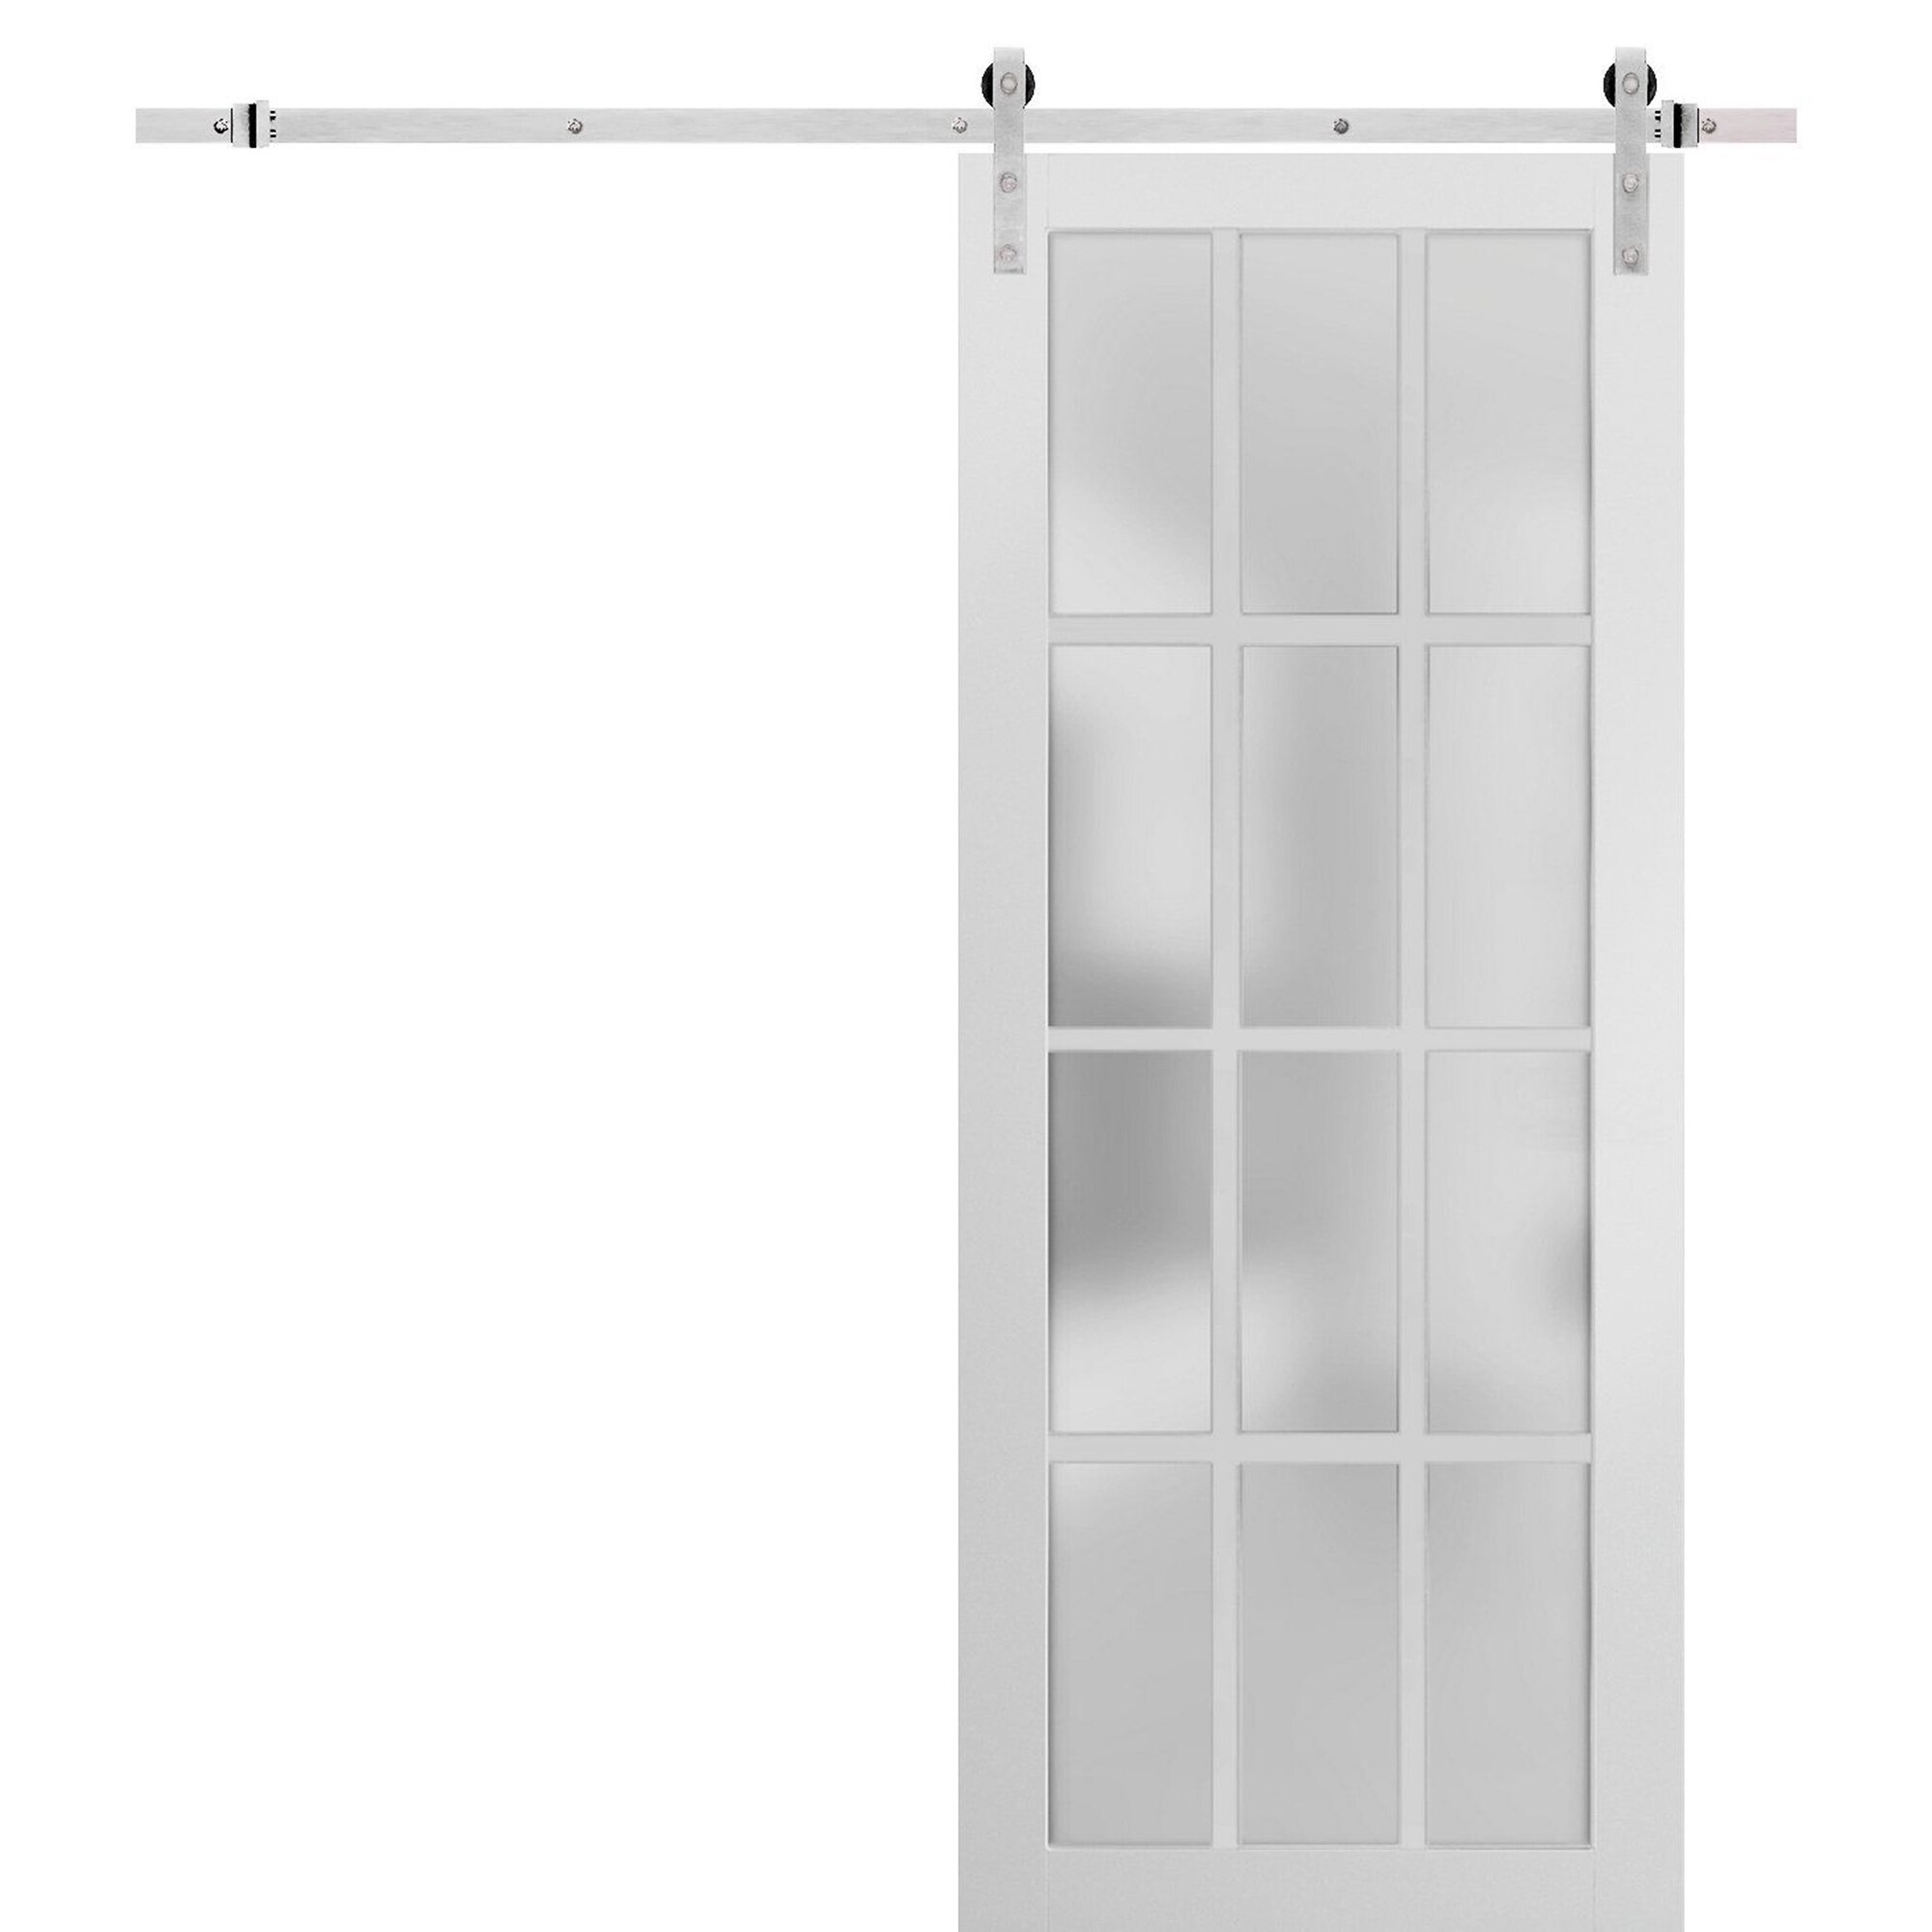 Unknown1 12 Frosted Glass Solid Wooden Barn Door in Matte White Finish with Stainless Steel Hardware 30 X 84 Sliding Wood Includes 